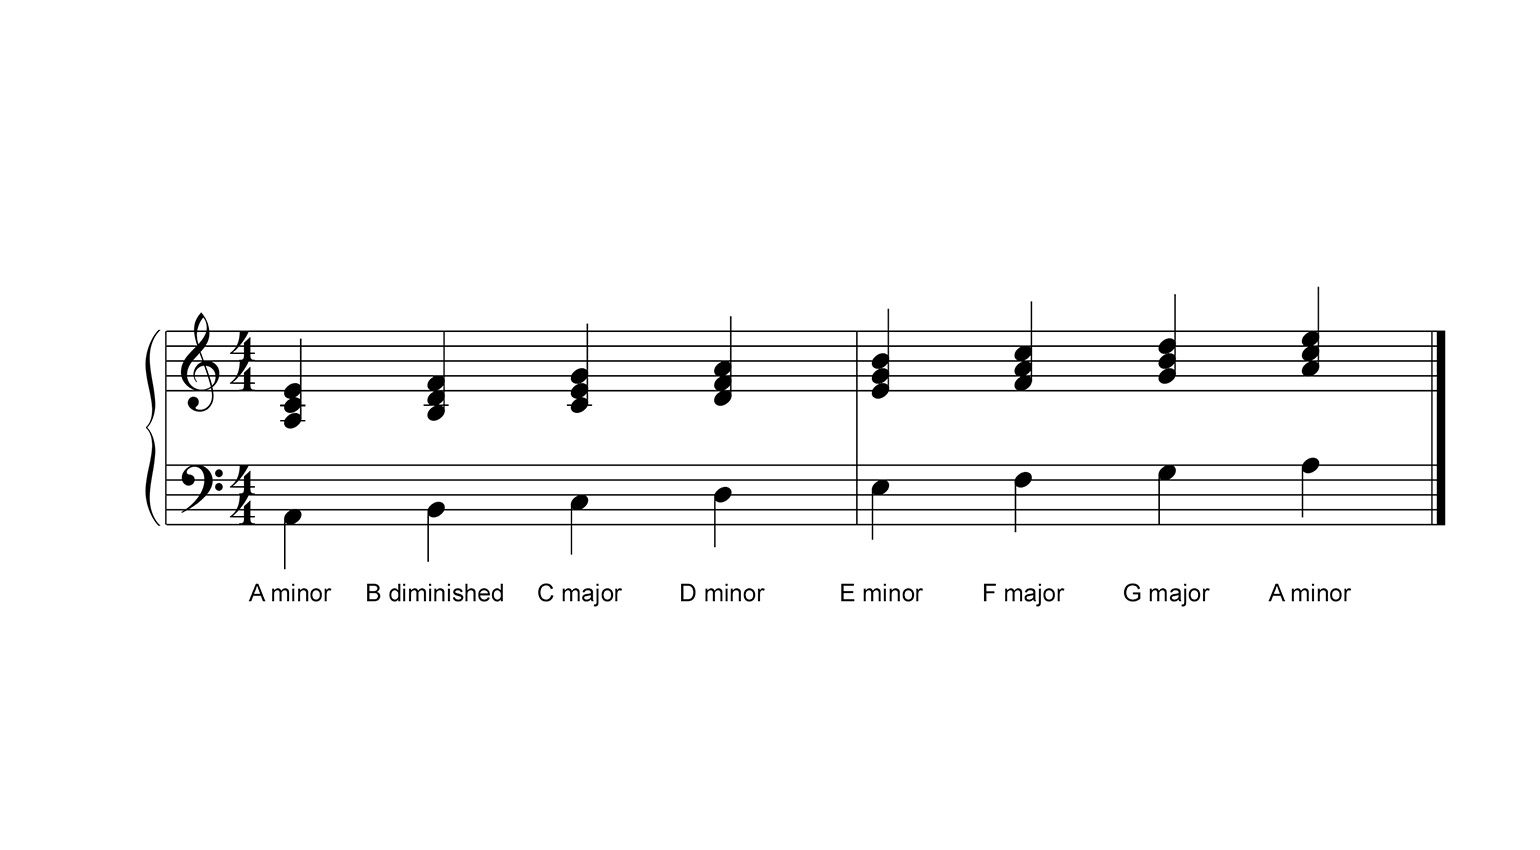 These are the names of the chords that can occur in A natural minor